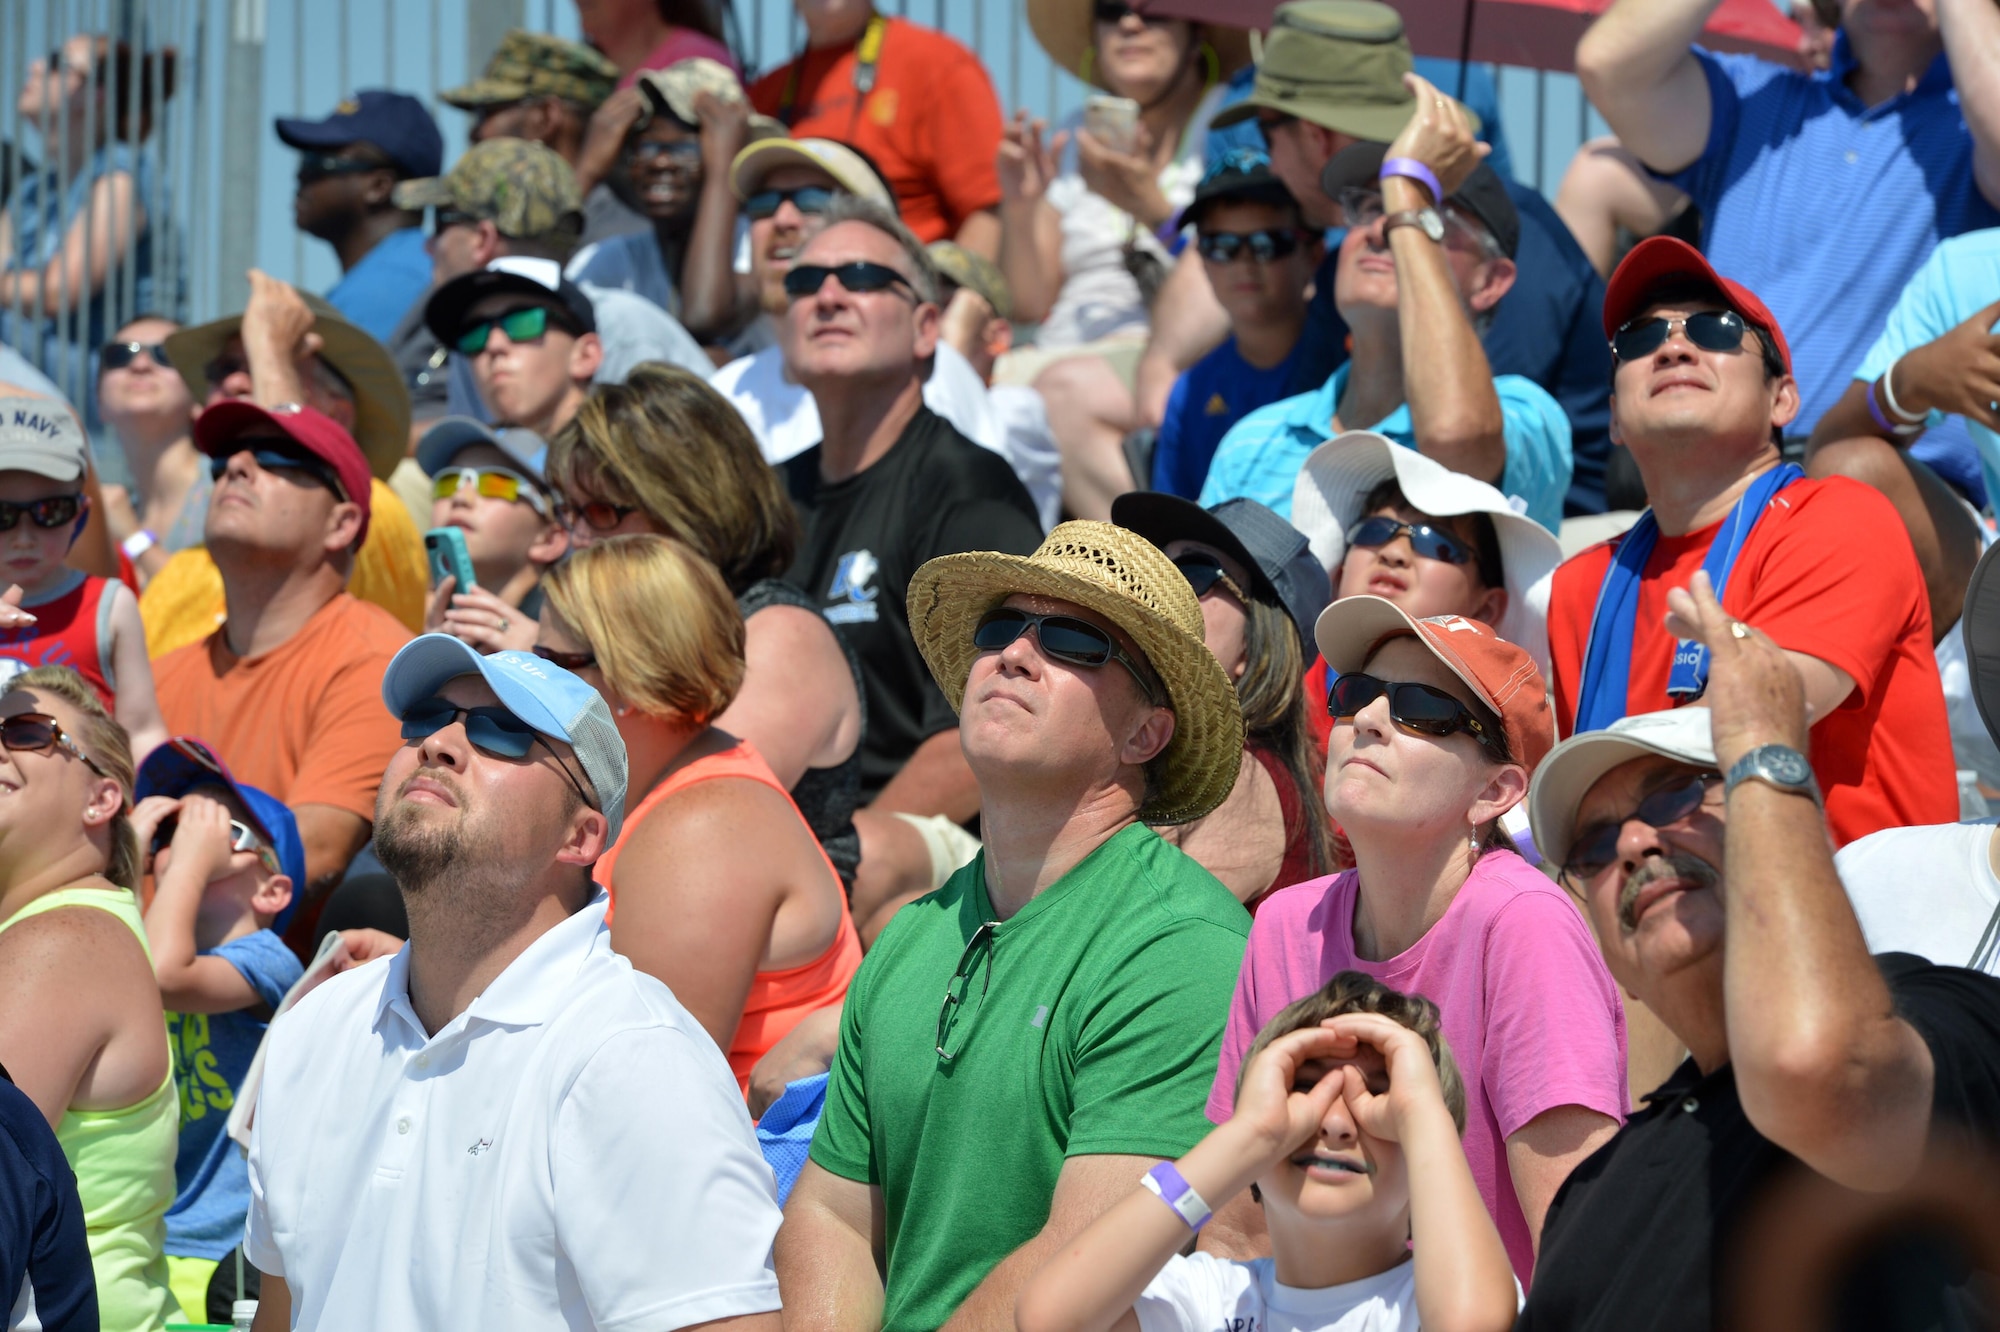 Attendees of the Wings Over Wayne Air Show watch aerial performances overhead, May 20, 2017, at Seymour Johnson Air Force Base, North Carolina. Seymour Johnson AFB opened its gates to the public for a free, two-day event as a way to thank the local community for their ongoing support of the base’s mission. (U.S. Air Force photo by Airman 1st Class Christopher Maldonado)